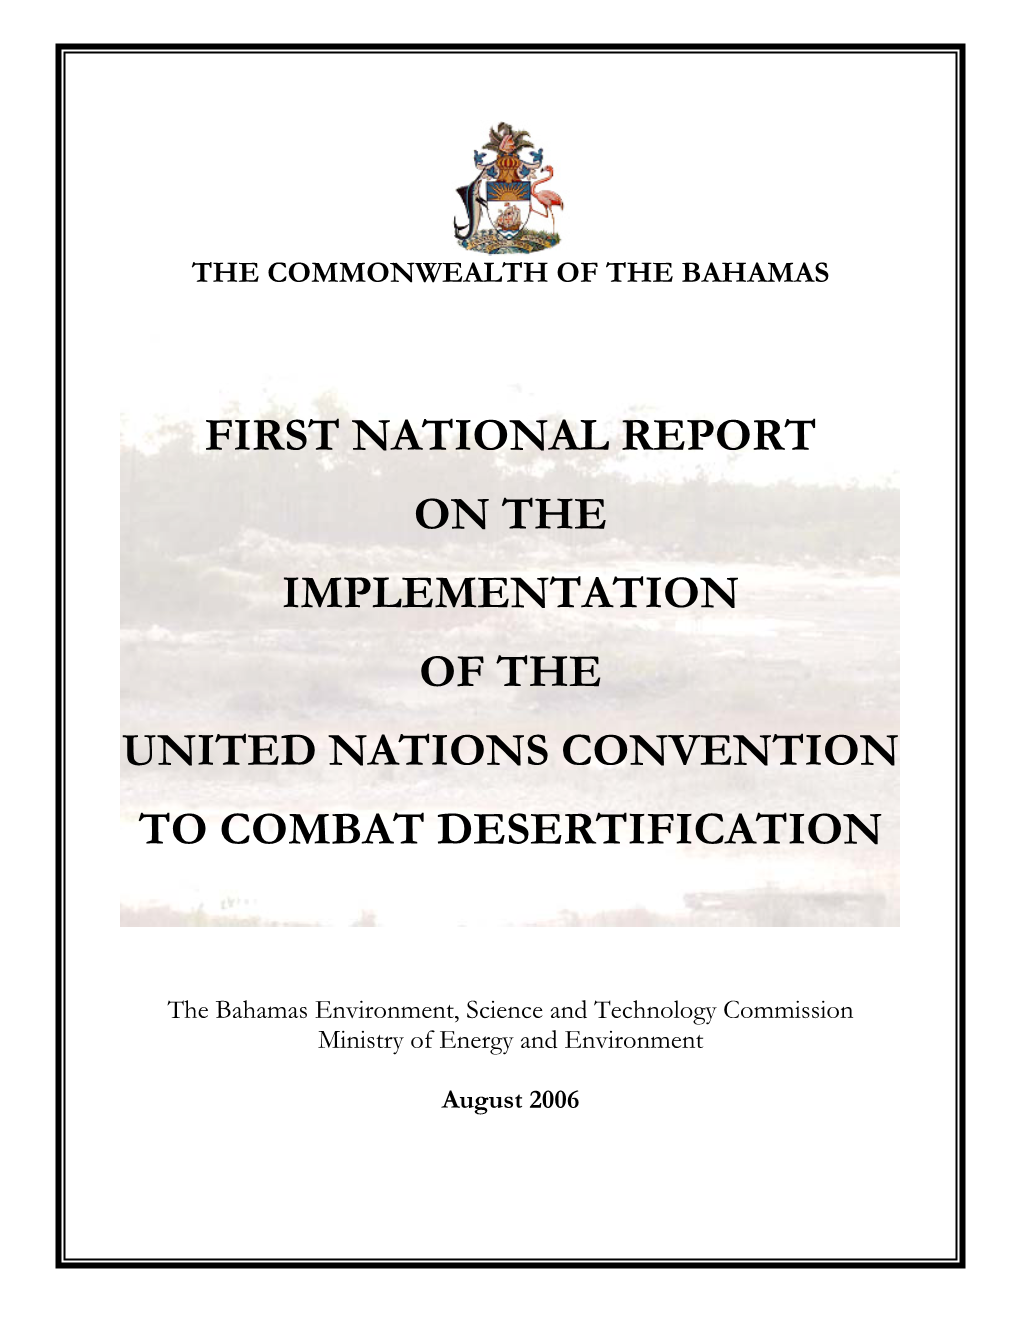 First National Report on the Implementation of the United Nations Convention to Combat Desertification